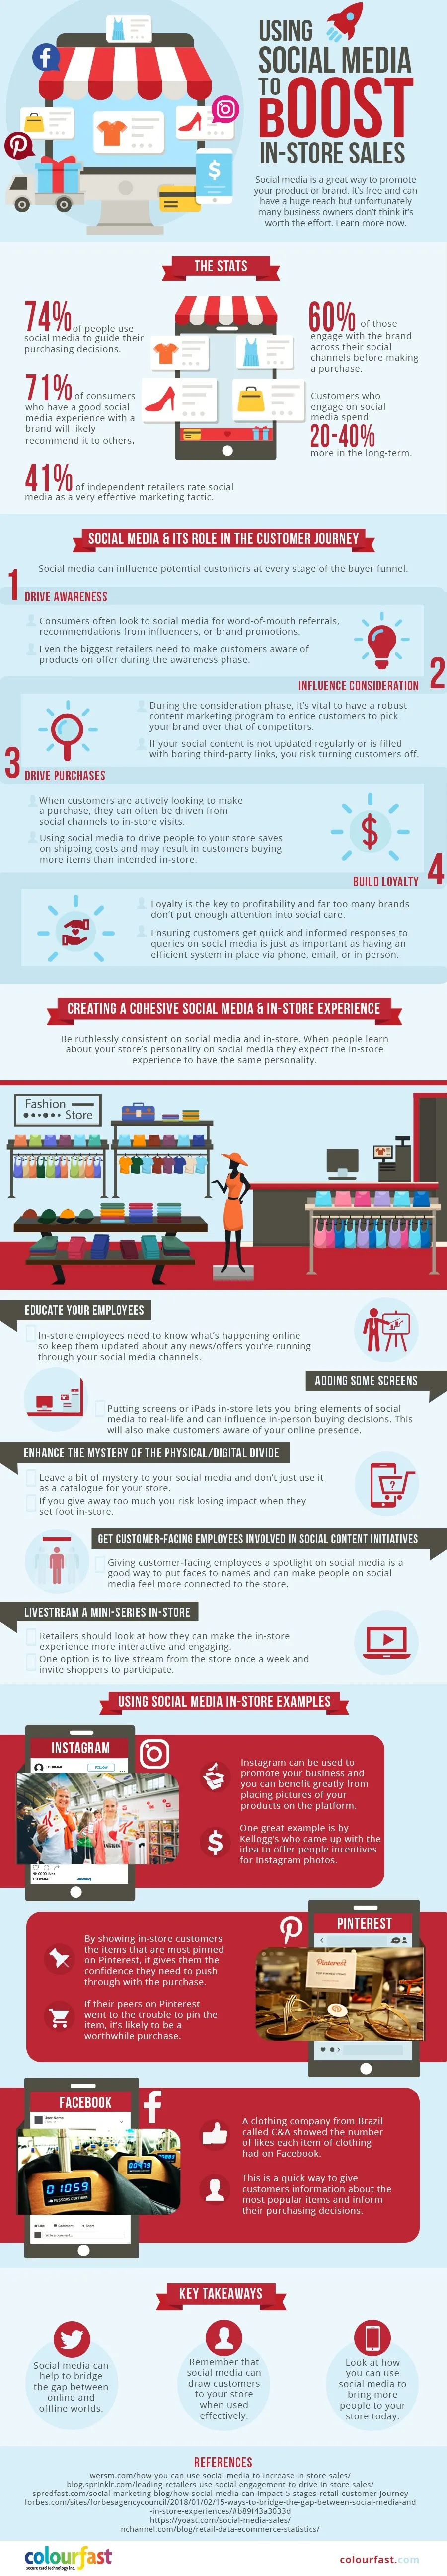 Using Social Media to Boost In-store Sales [Infographic]